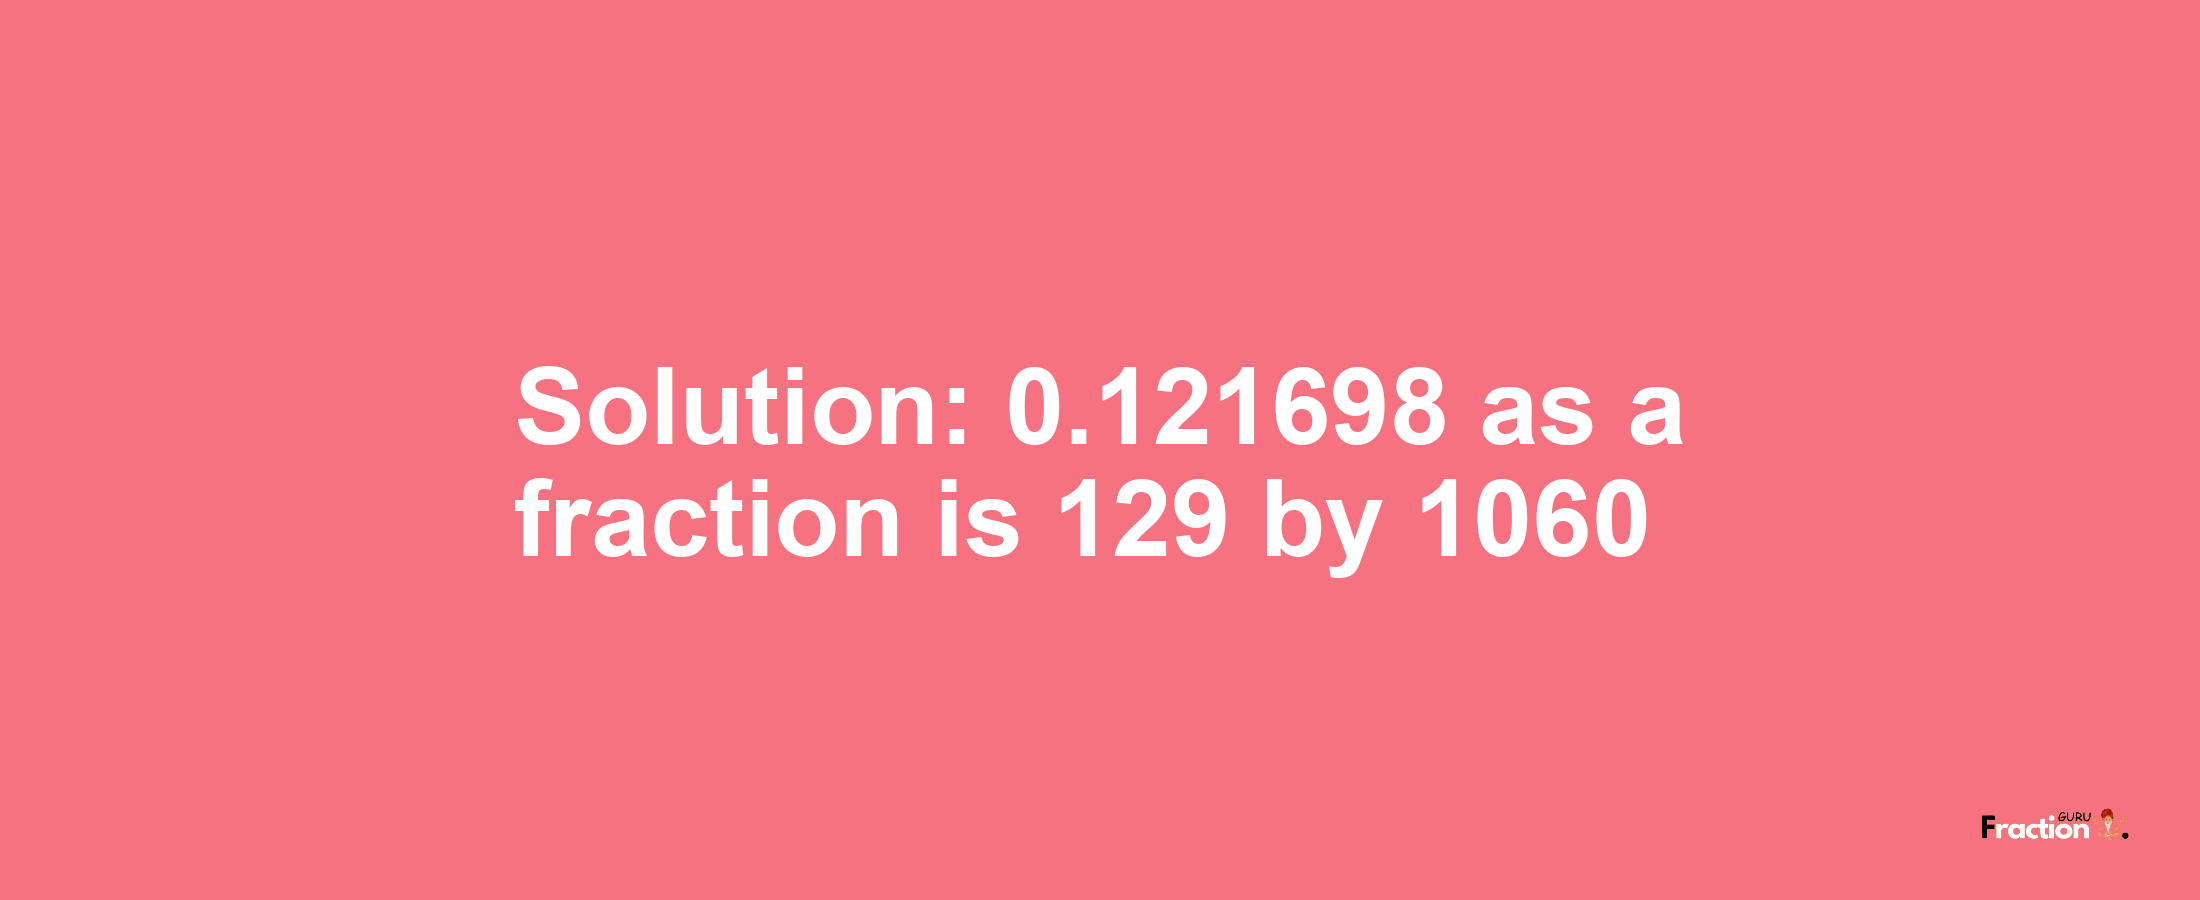 Solution:0.121698 as a fraction is 129/1060